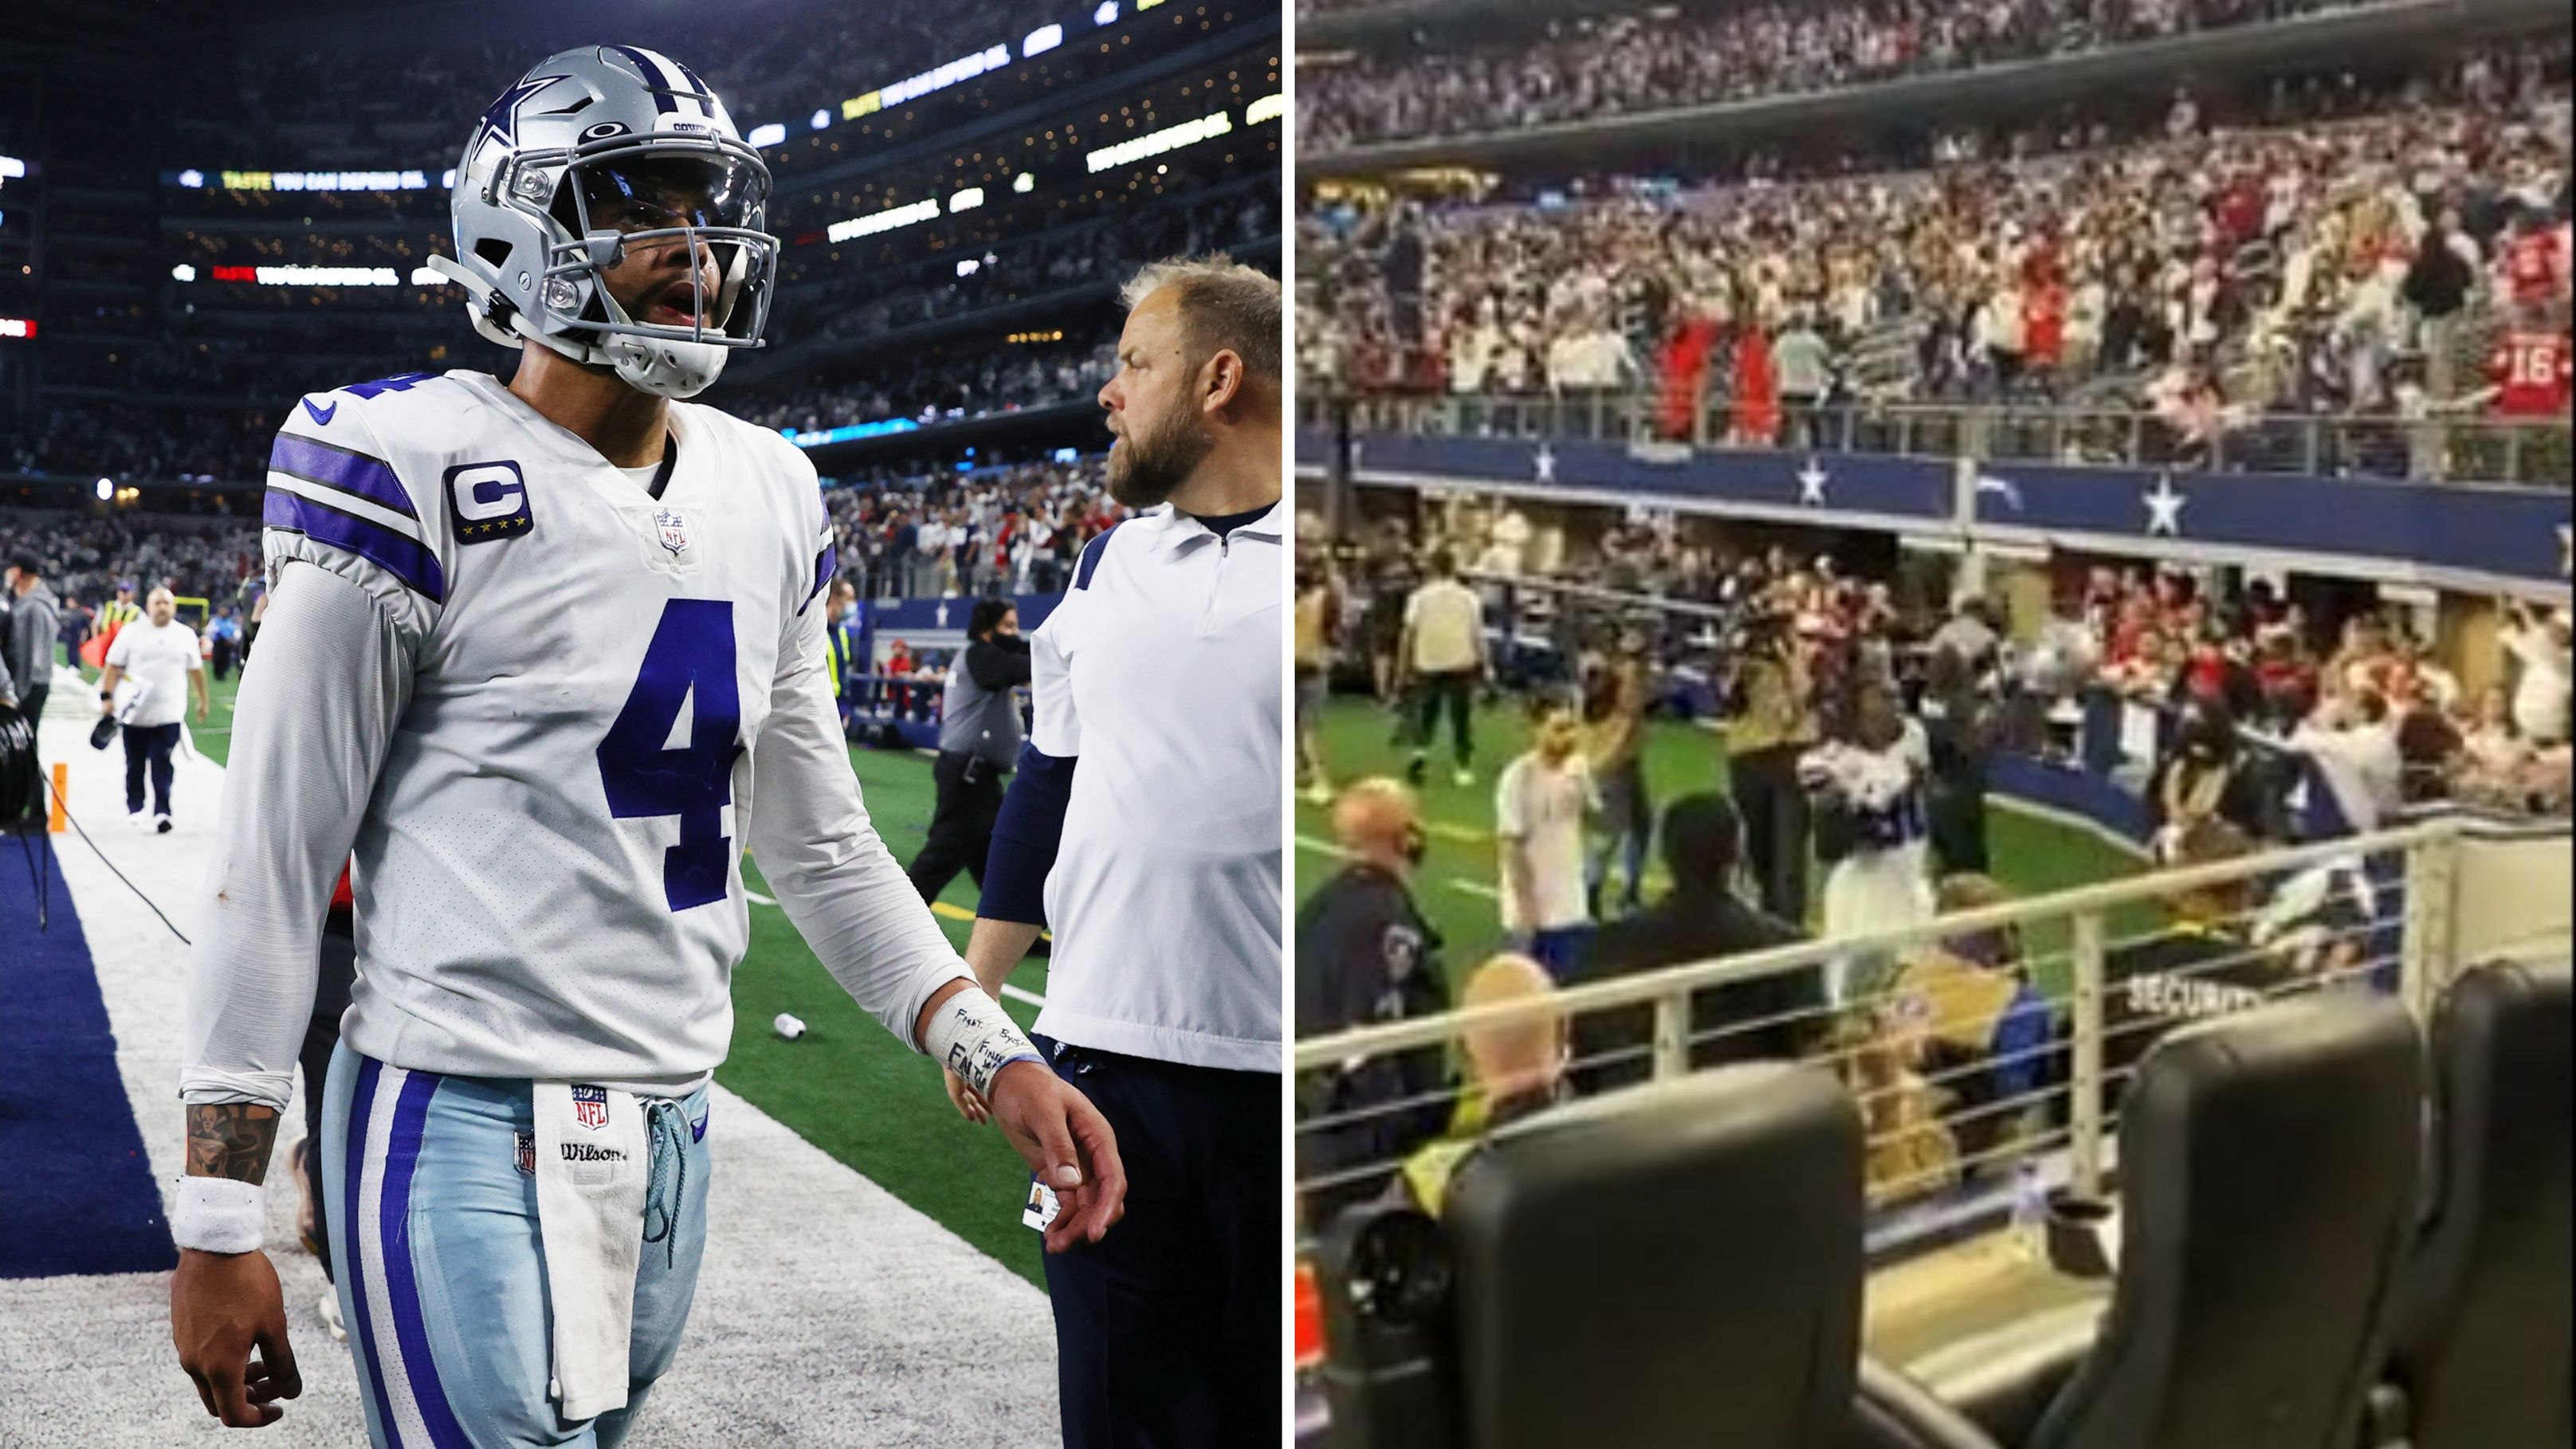 Dallas Cowboys fans hurl bottles and rubbish, star's disgraceful comments after chaotic end to NFL game